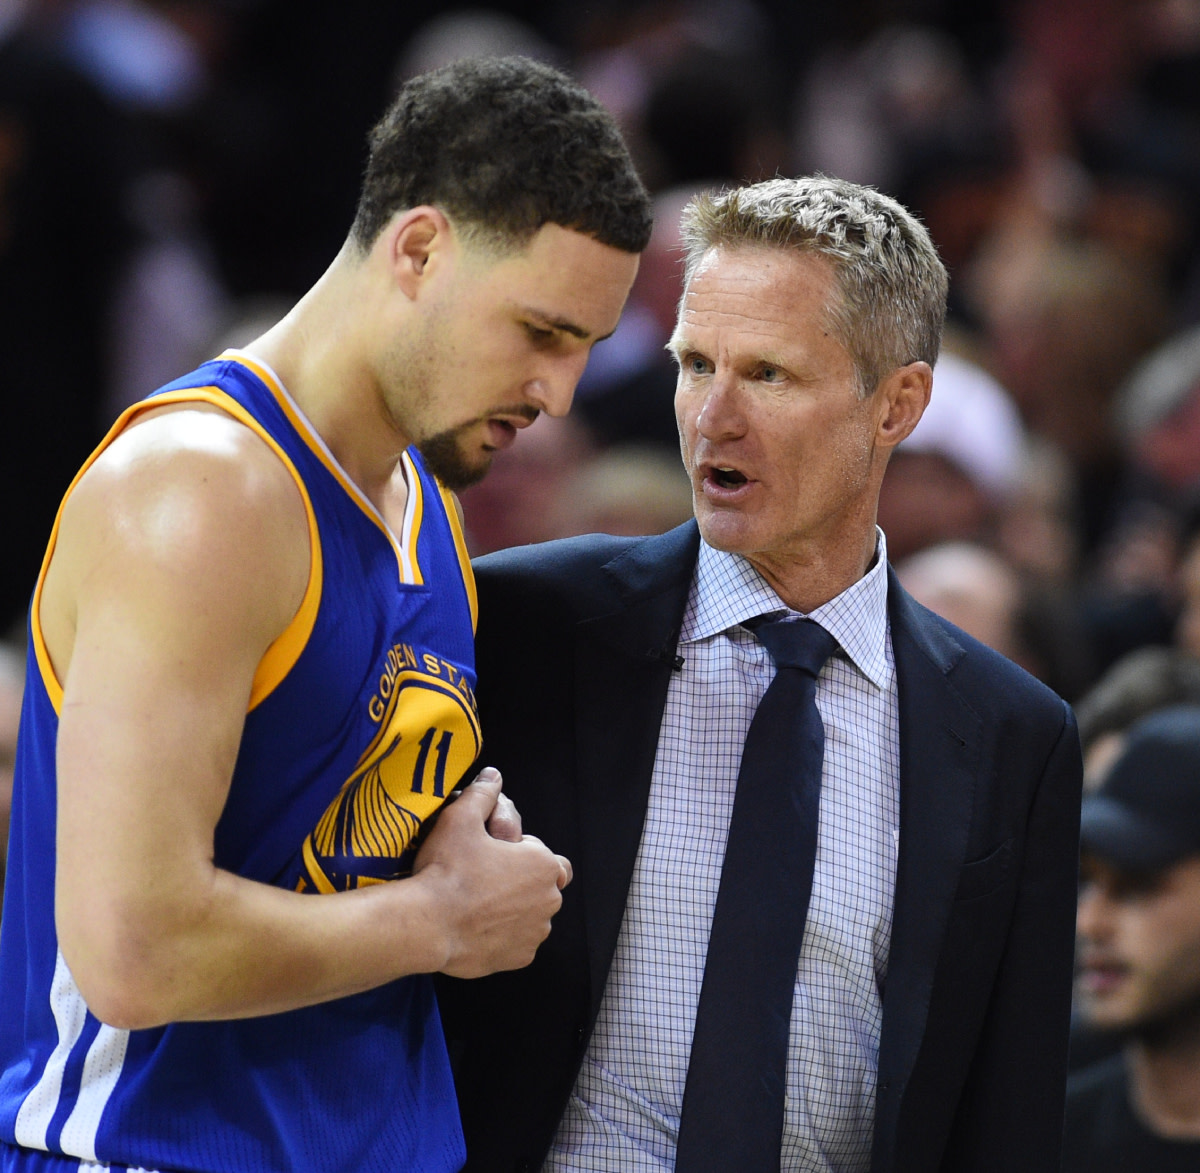 Steve Kerr Says He Expects Klay Thompson To Be More Consistent Next Year: "Klay Is Just On Cloud Nine Right Now."